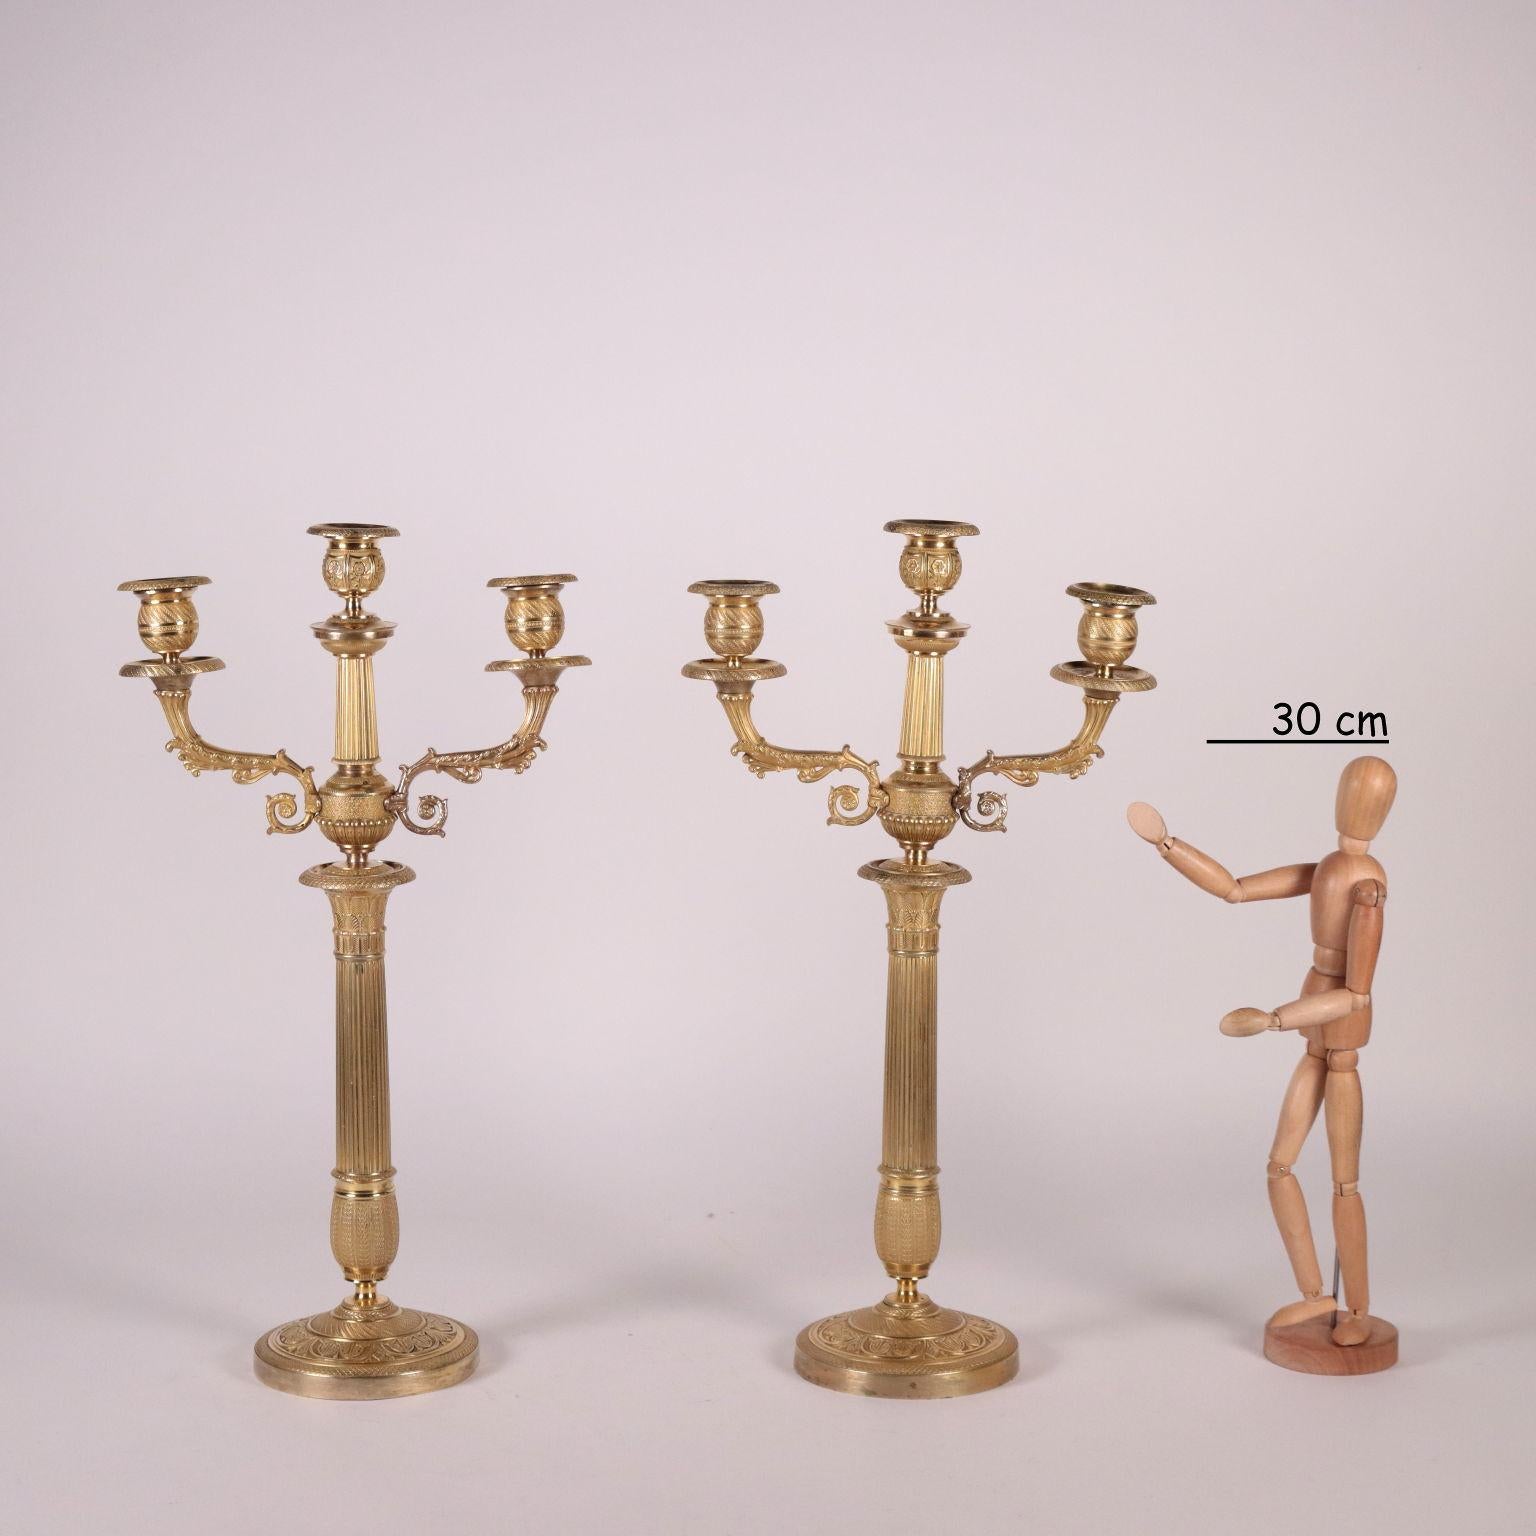 Pair of candelabra with three lights, finely chiselled bronze and gilded with mercury. Vegetal embossed decorations and spiral branches.